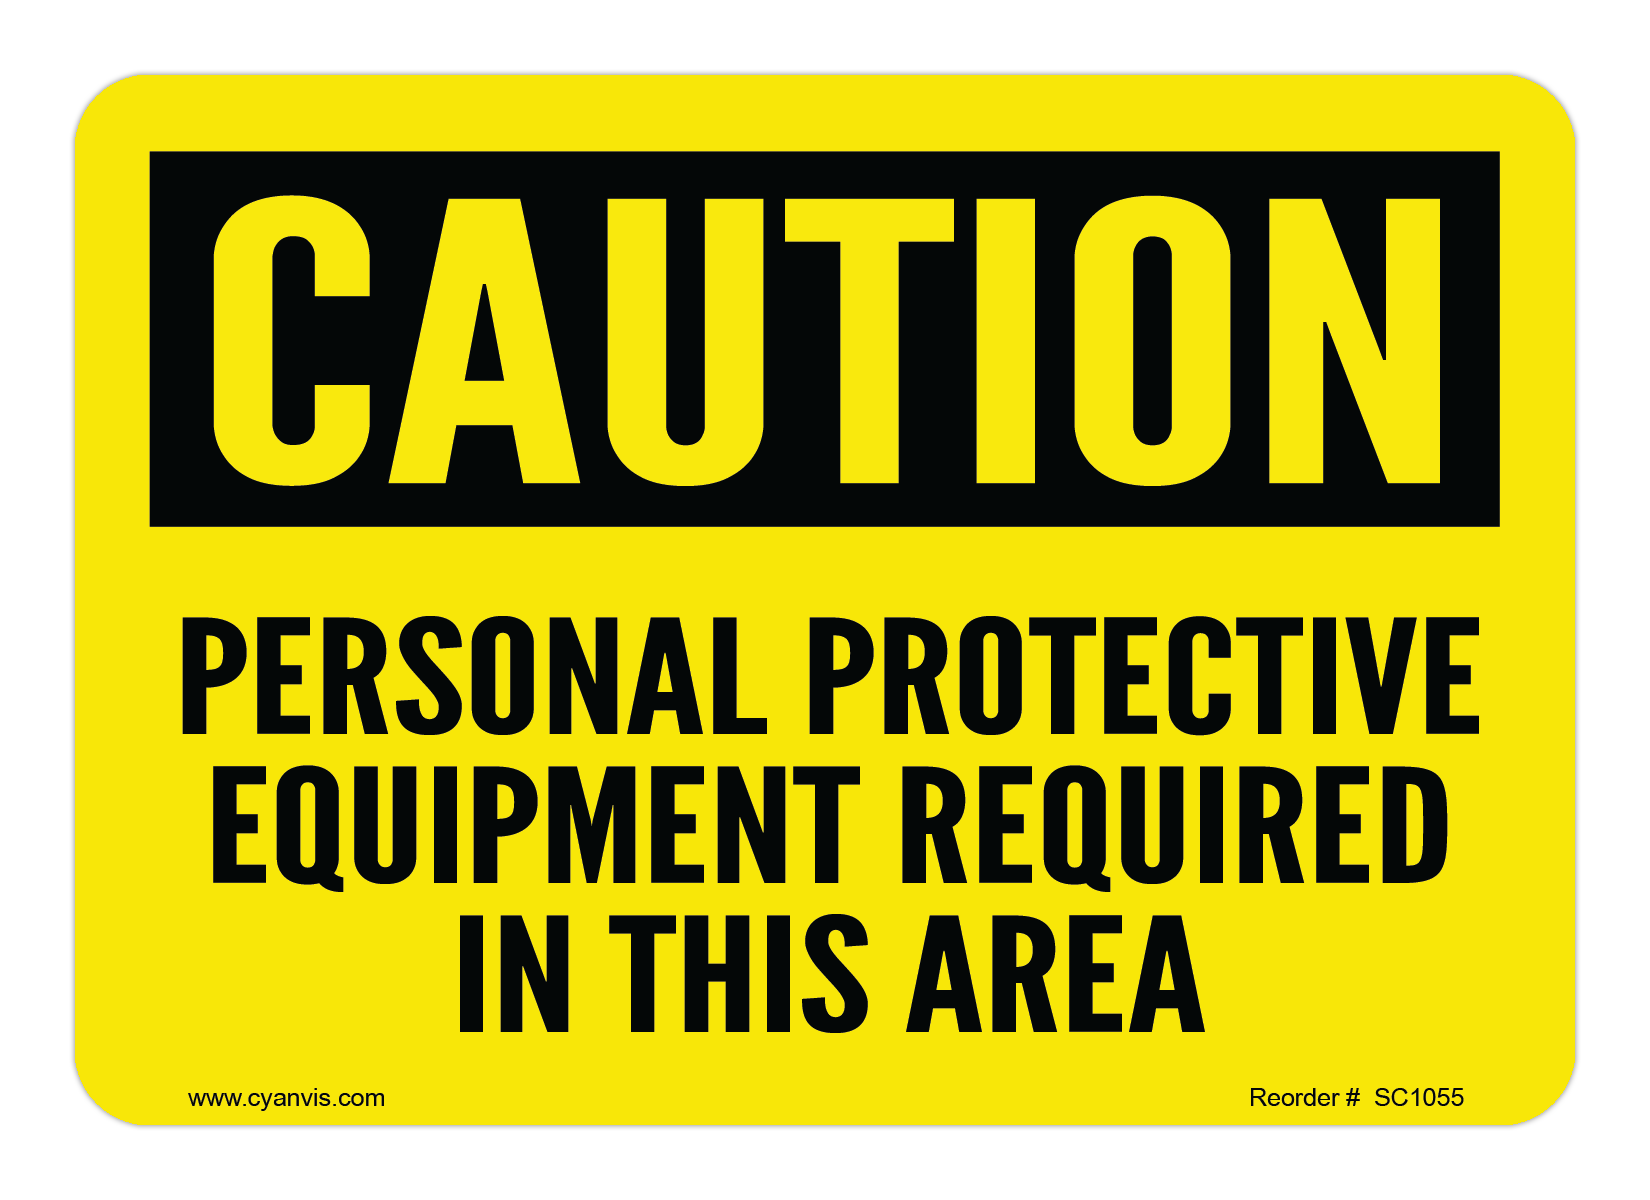 Safety Sign: Caution - PERSONAL PROTECTIVE EQUIPMENT REQUIRED IN THIS AREA - CYANvisuals